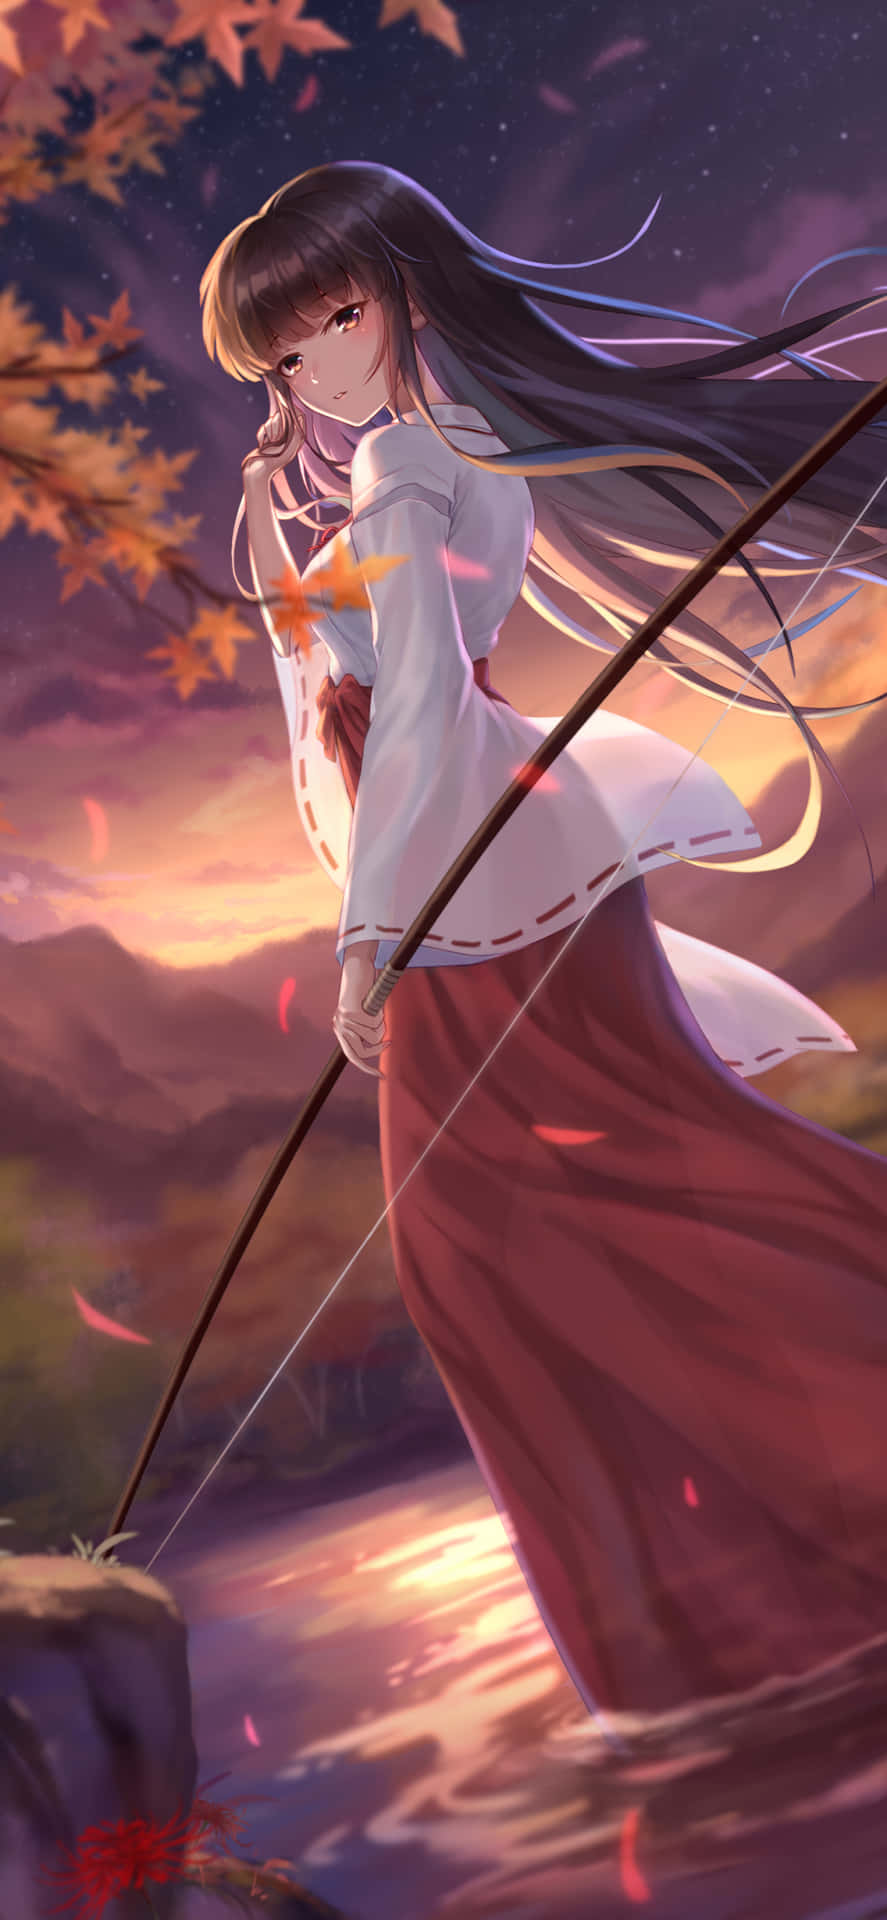 Get the perfect wallpaper for your iPhone with this Inuyasha design! Wallpaper